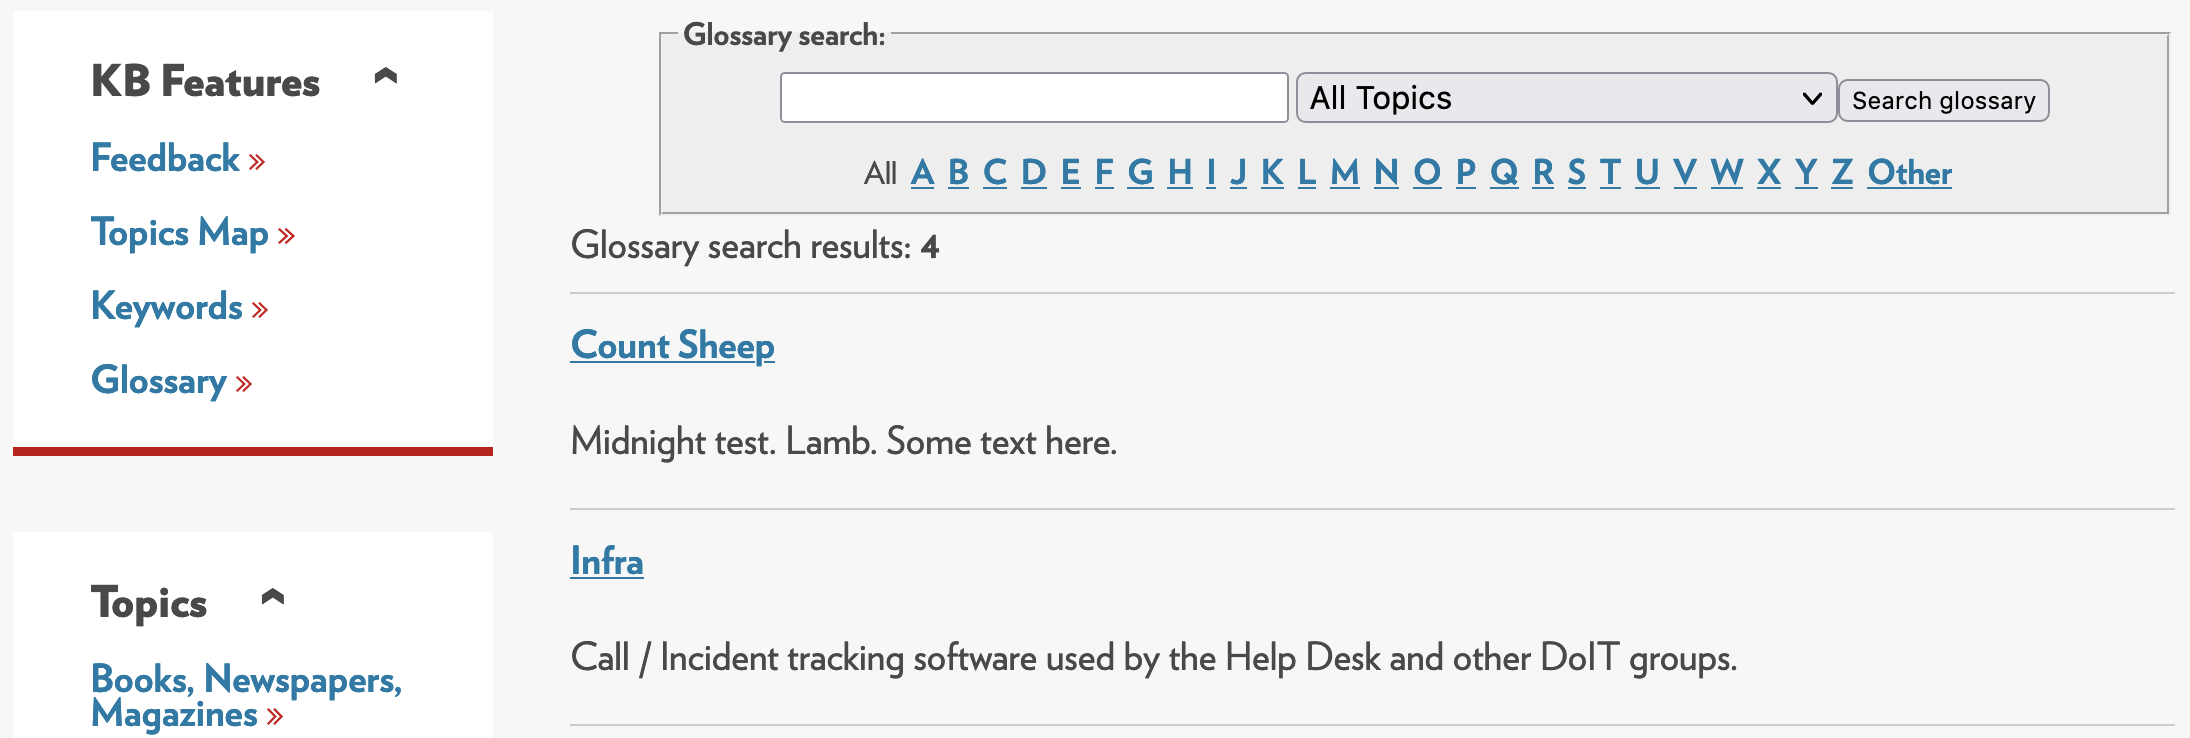 Kb live site glossary page showing horizontal alphabetic with glossary results and their definitions